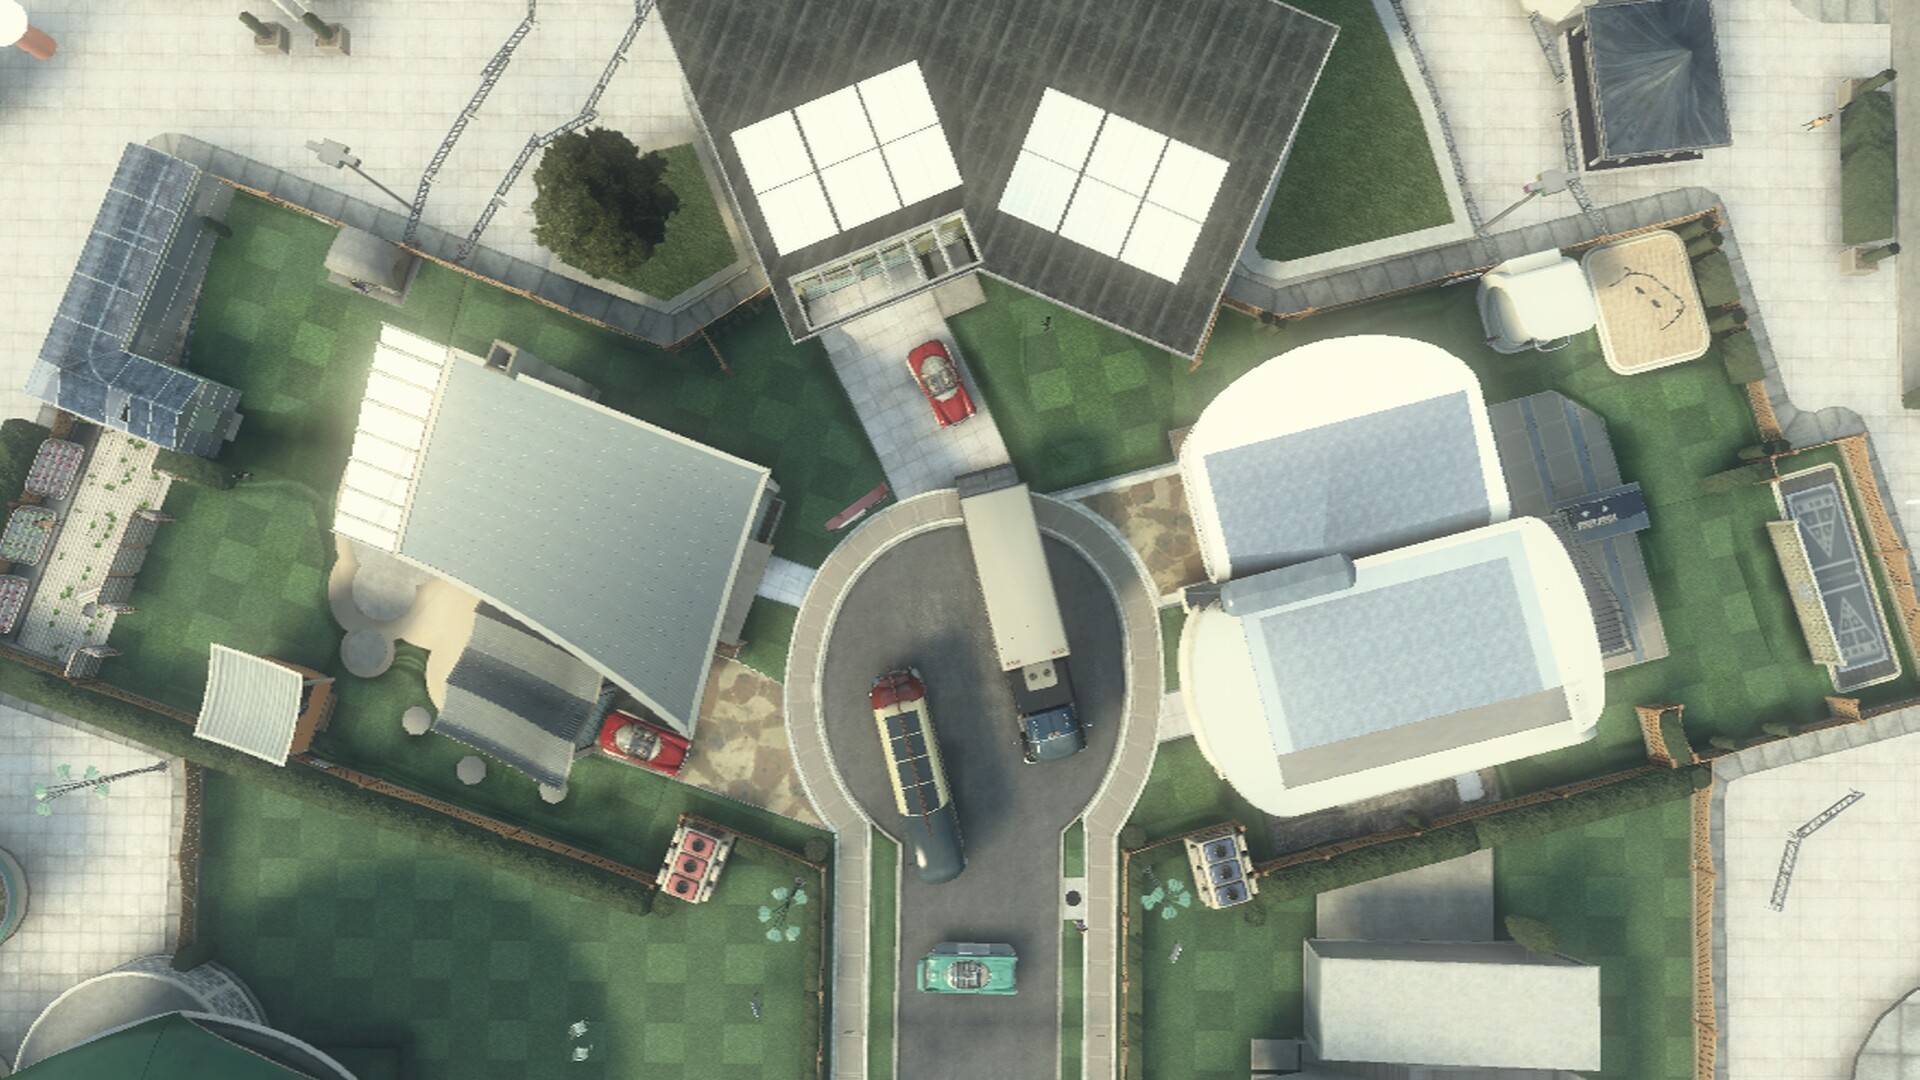 How to Find the Atari Easter Egg in the Call of Duty: Black Ops 2 Map  Nuketown 2025 « Xbox 360 :: WonderHowTo